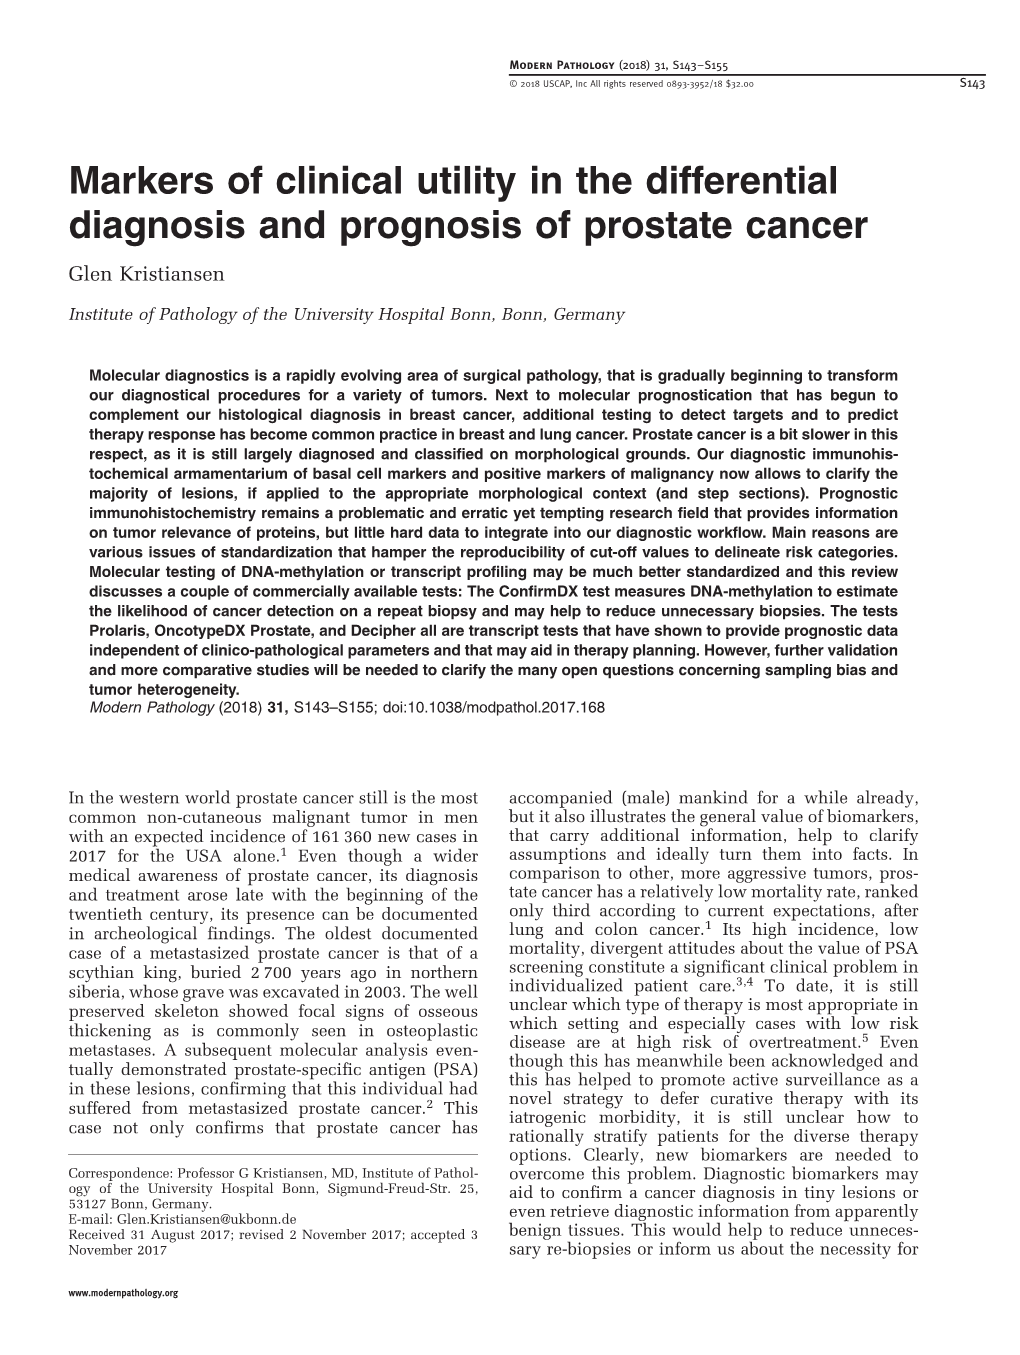 Markers of Clinical Utility in the Differential Diagnosis and Prognosis of Prostate Cancer Glen Kristiansen